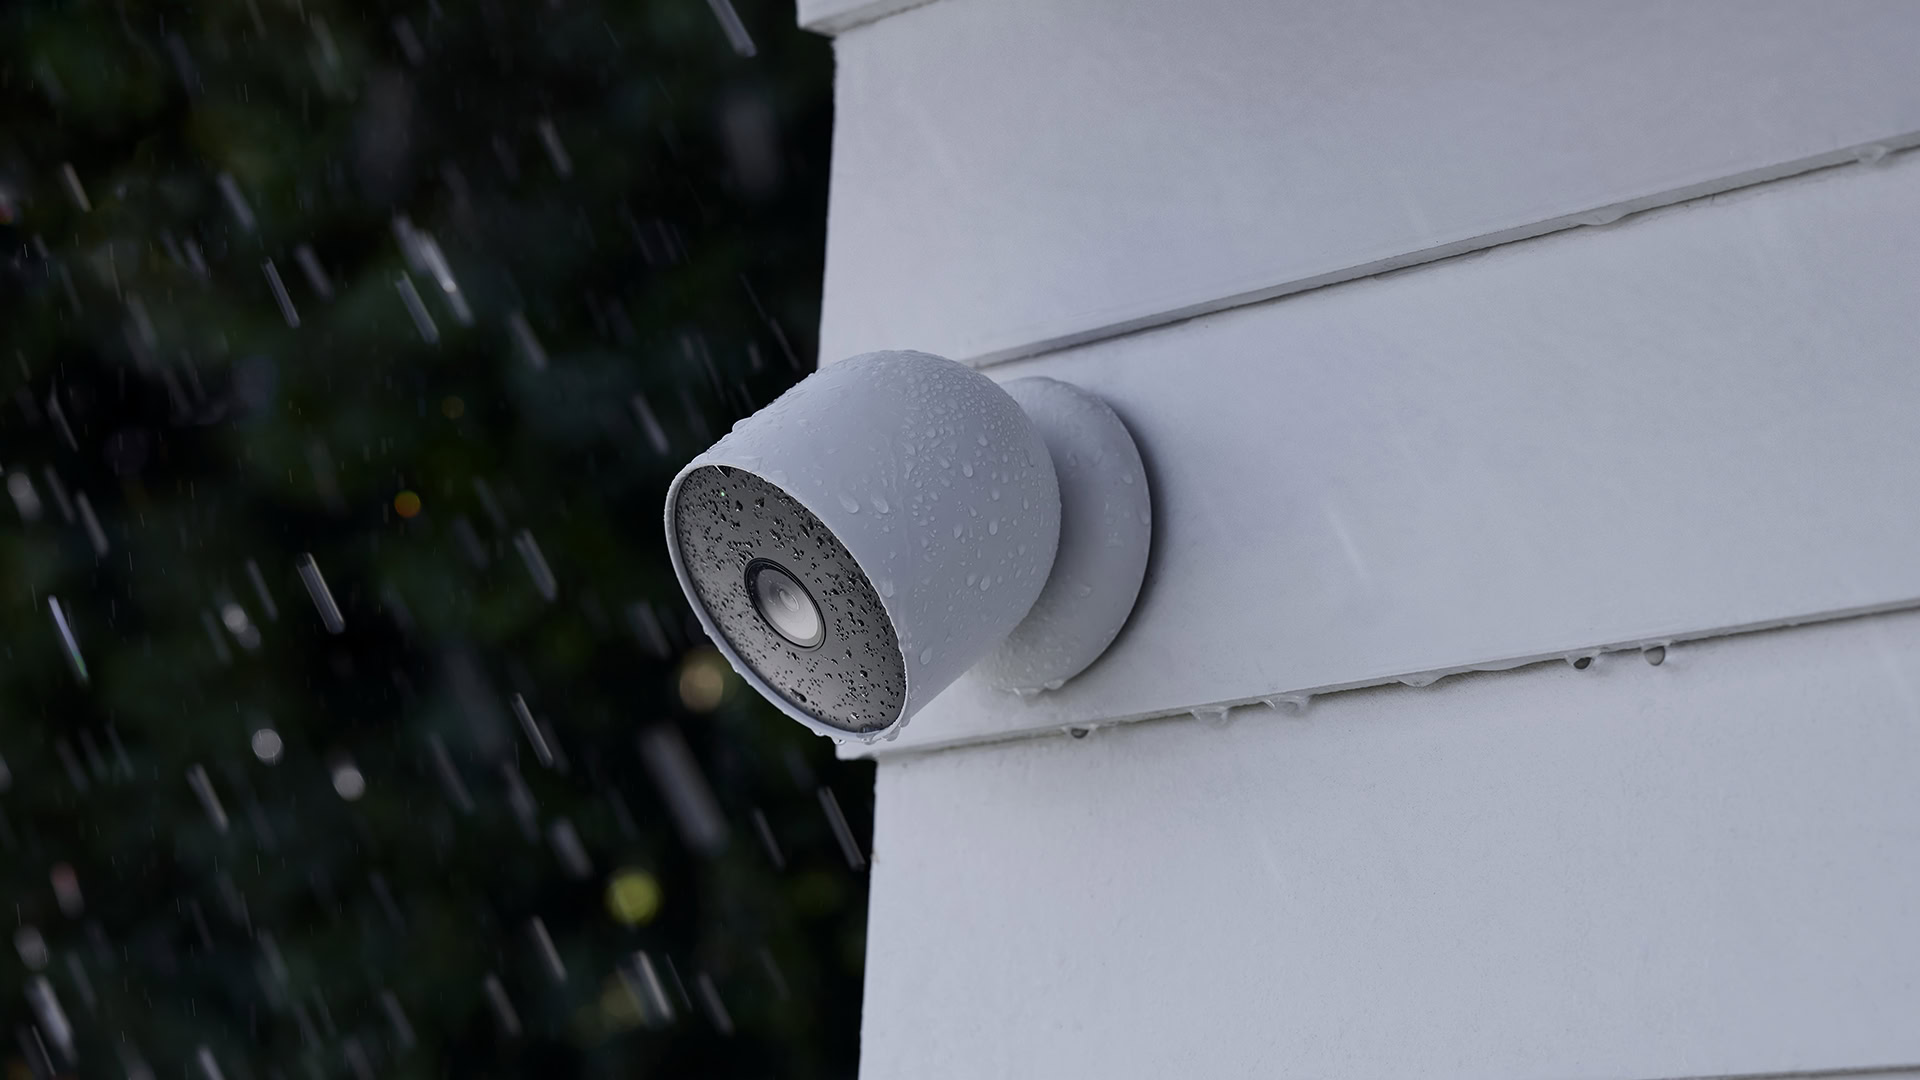 Nest Cam battery outdoors in the rain